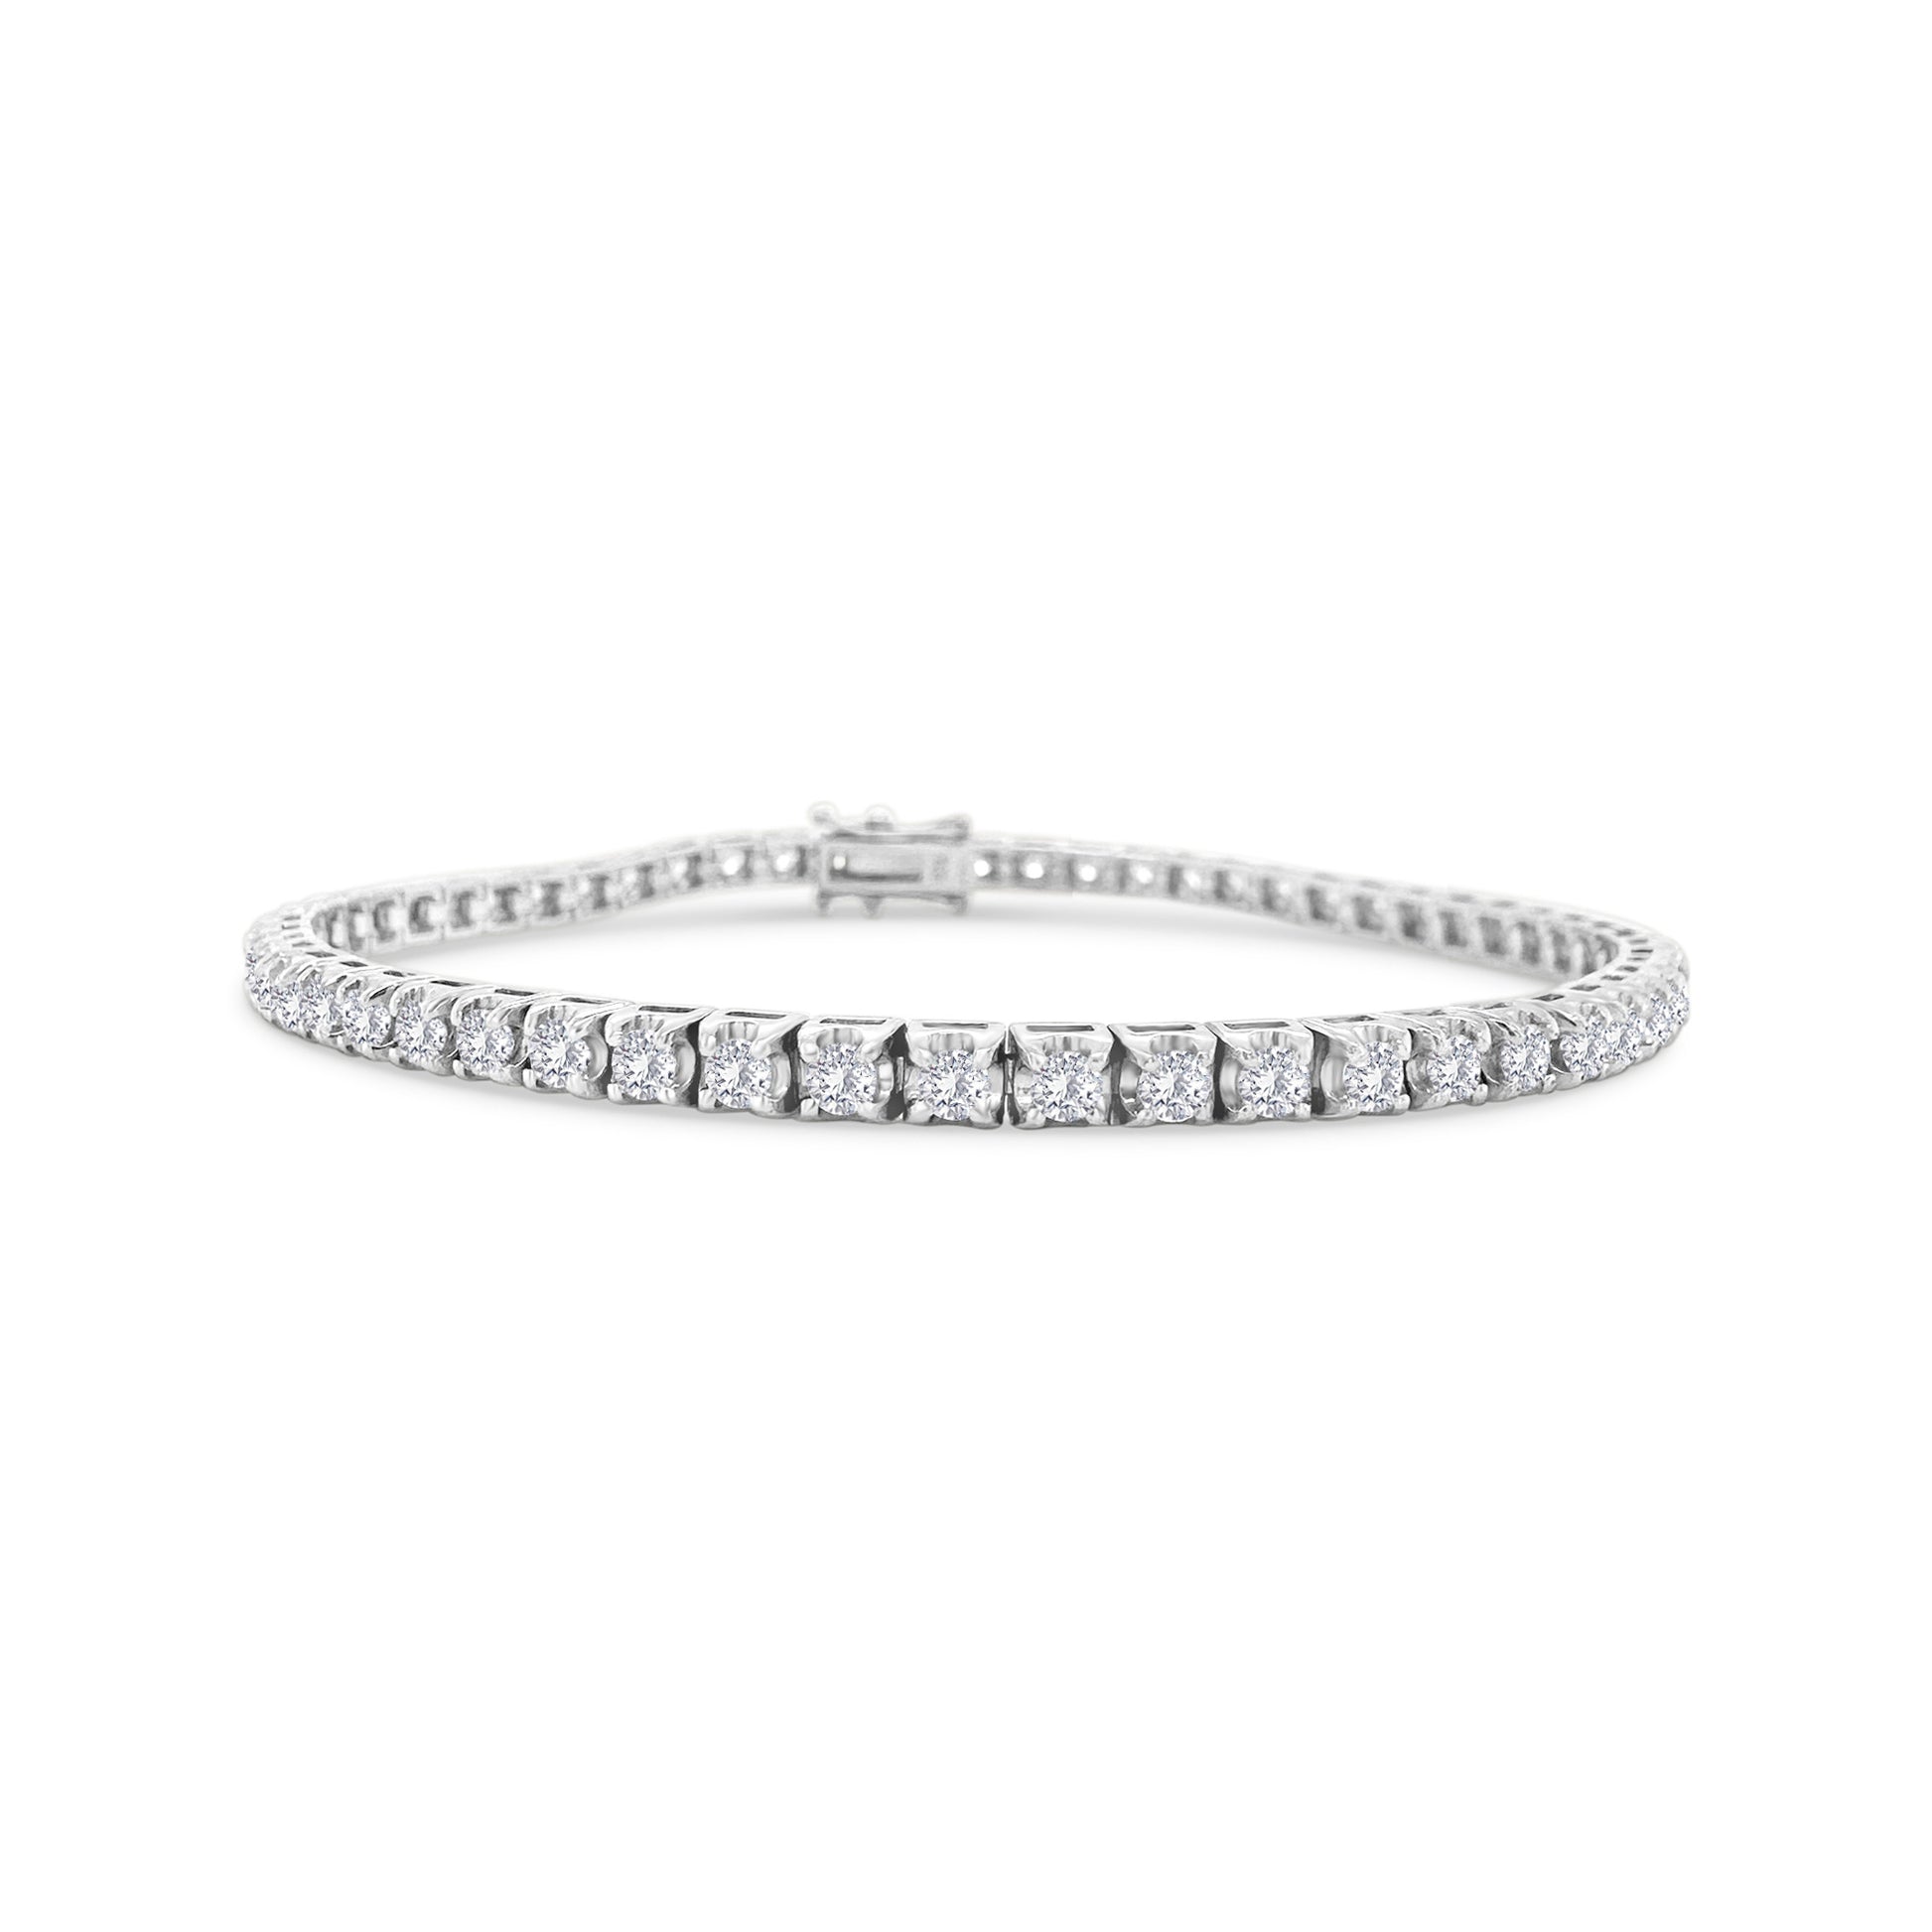 A stunning diamond tennis bracelet, featuring brilliant diamonds, perfect for any occasion, adding elegance and glamour to your look, a timeless accessory, sparkling with every movement, exuding sophistication and luxury, a must-have piece for every jewelry collection.